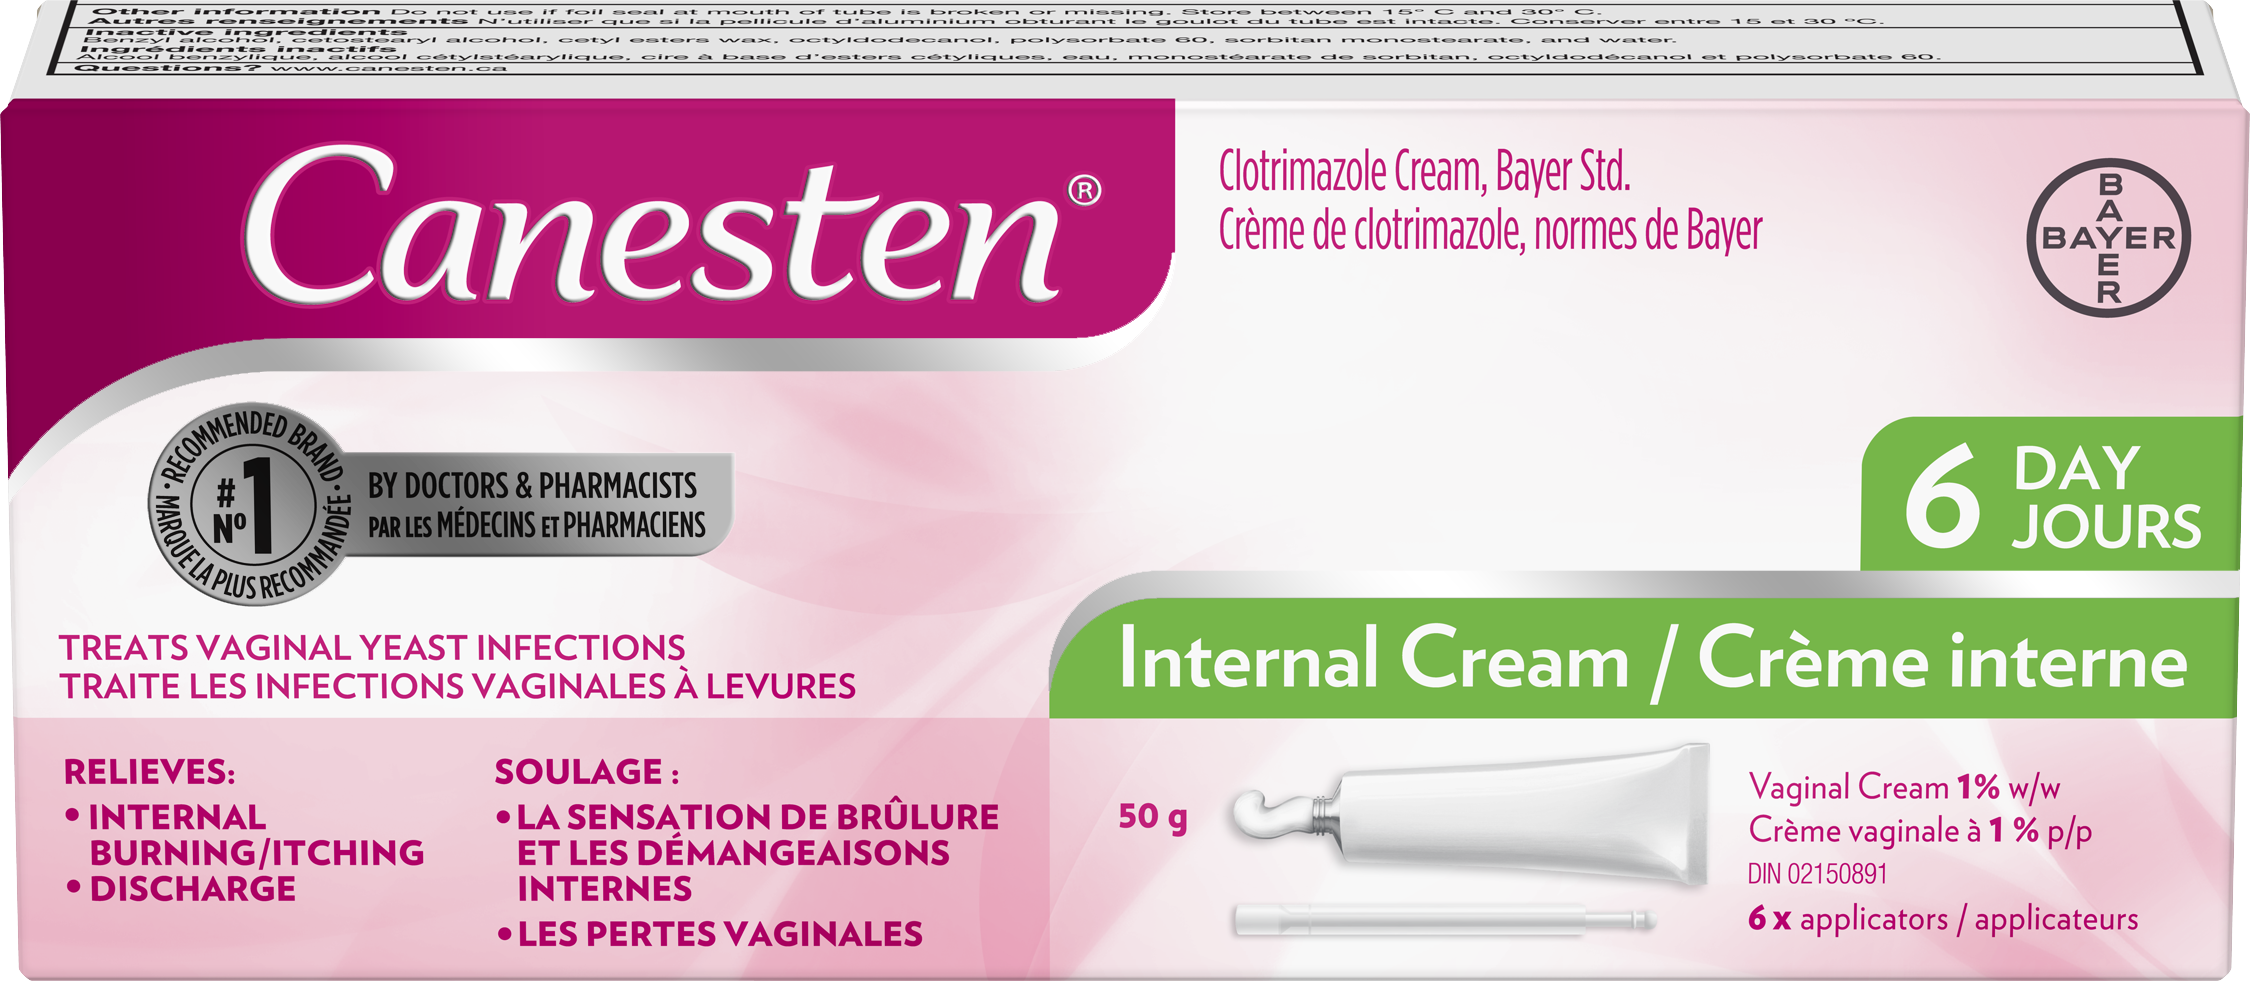 3-Day Cream Yeast Infection Treatment